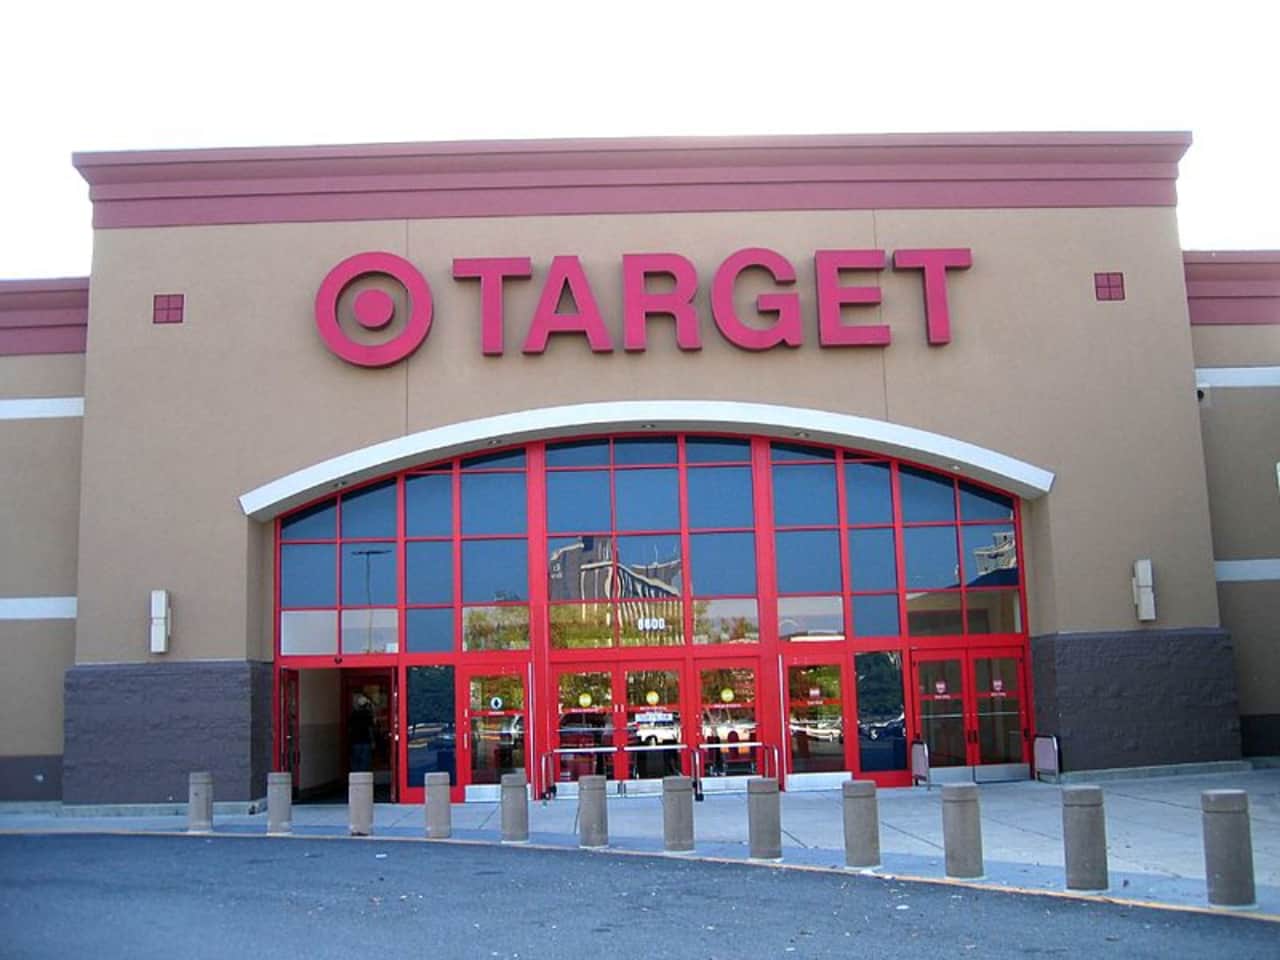 New York, 46 others states and the District of Columbia will receive $18.5 million in the Target settlement.